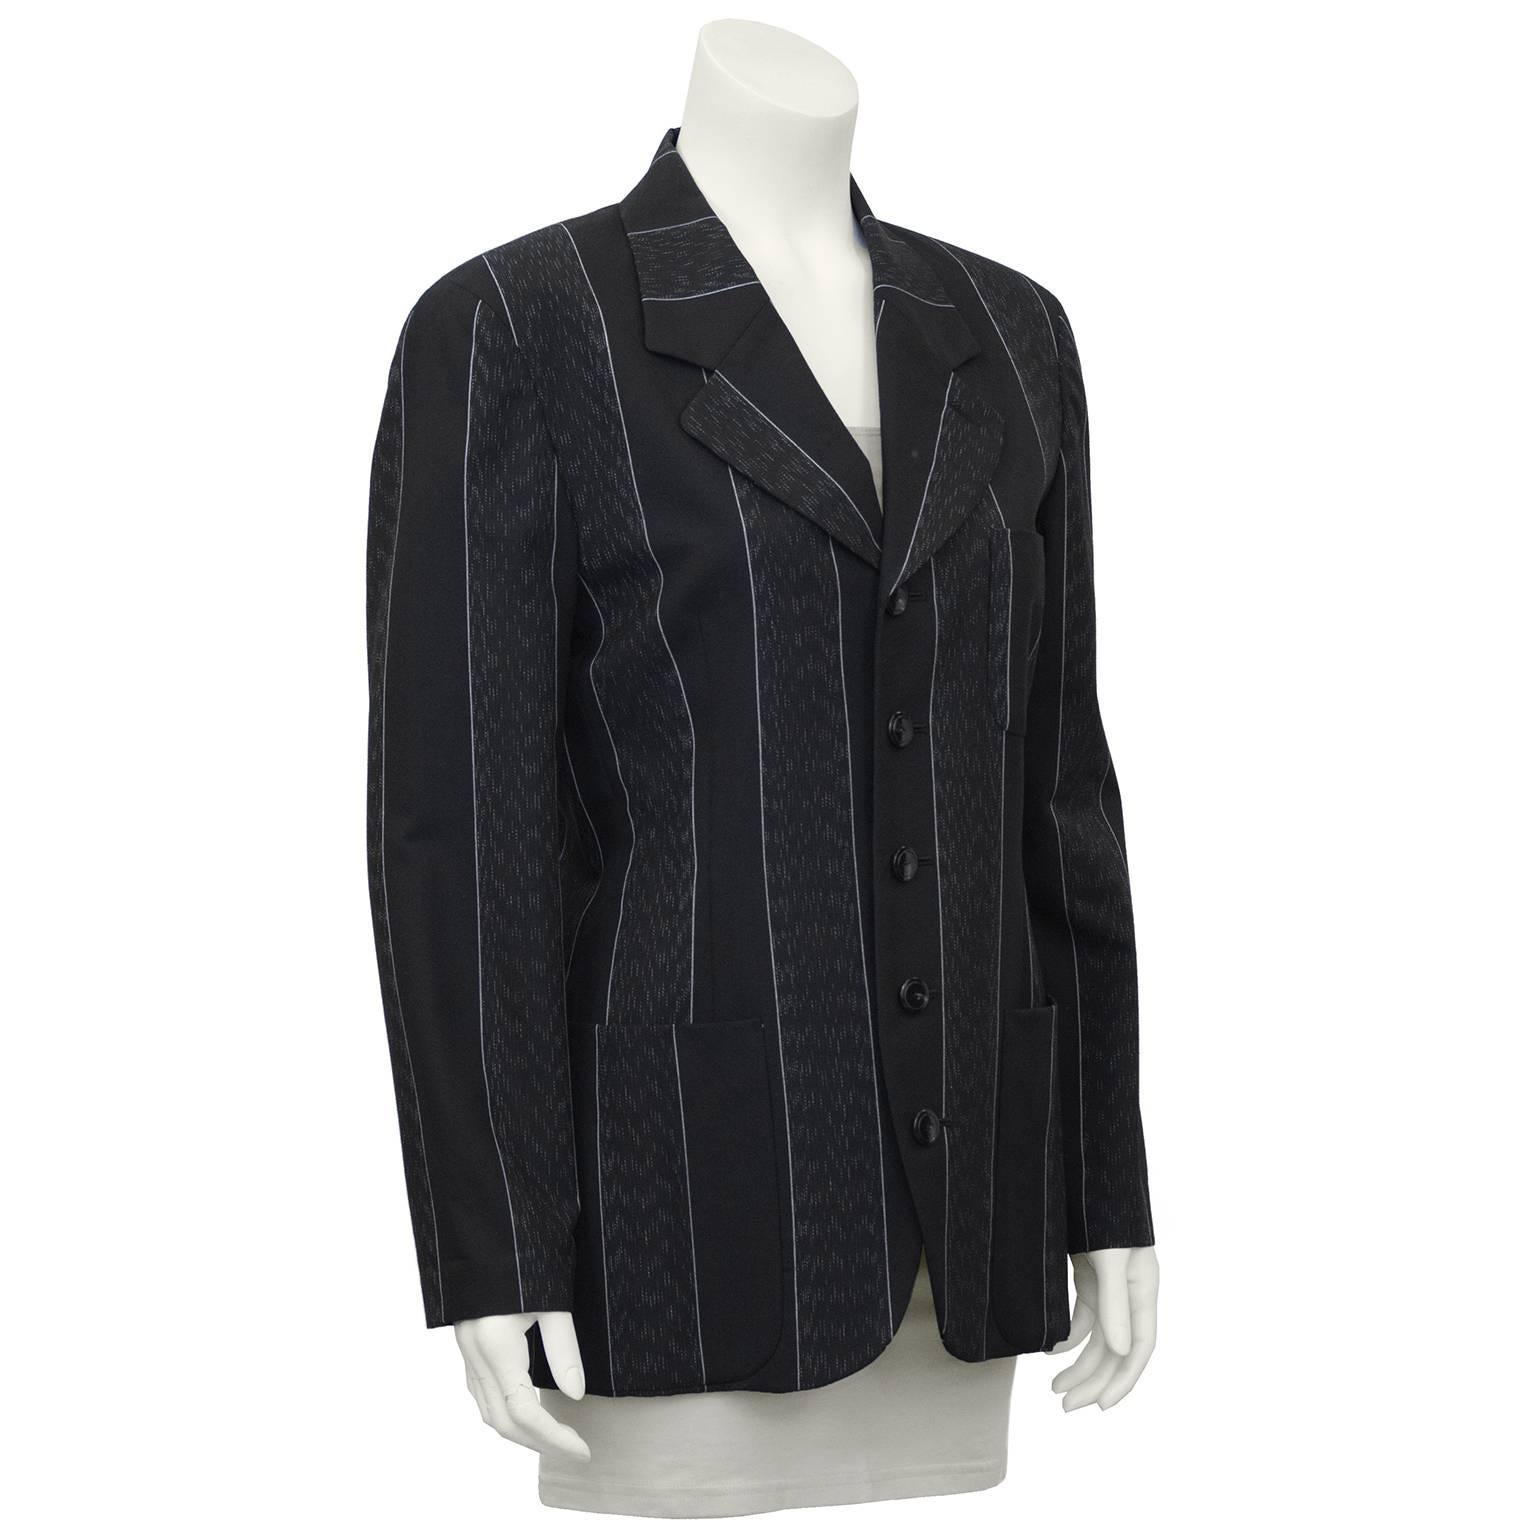 Japanese legendary designer Matsuhiro Matsuda grey wool pinstripe 5 button ladies blazer from the 1990's. Matsuda found success by interpreting classic British style, fabrics and tailoring then adding his own idiosyncratic Japanese humor to the